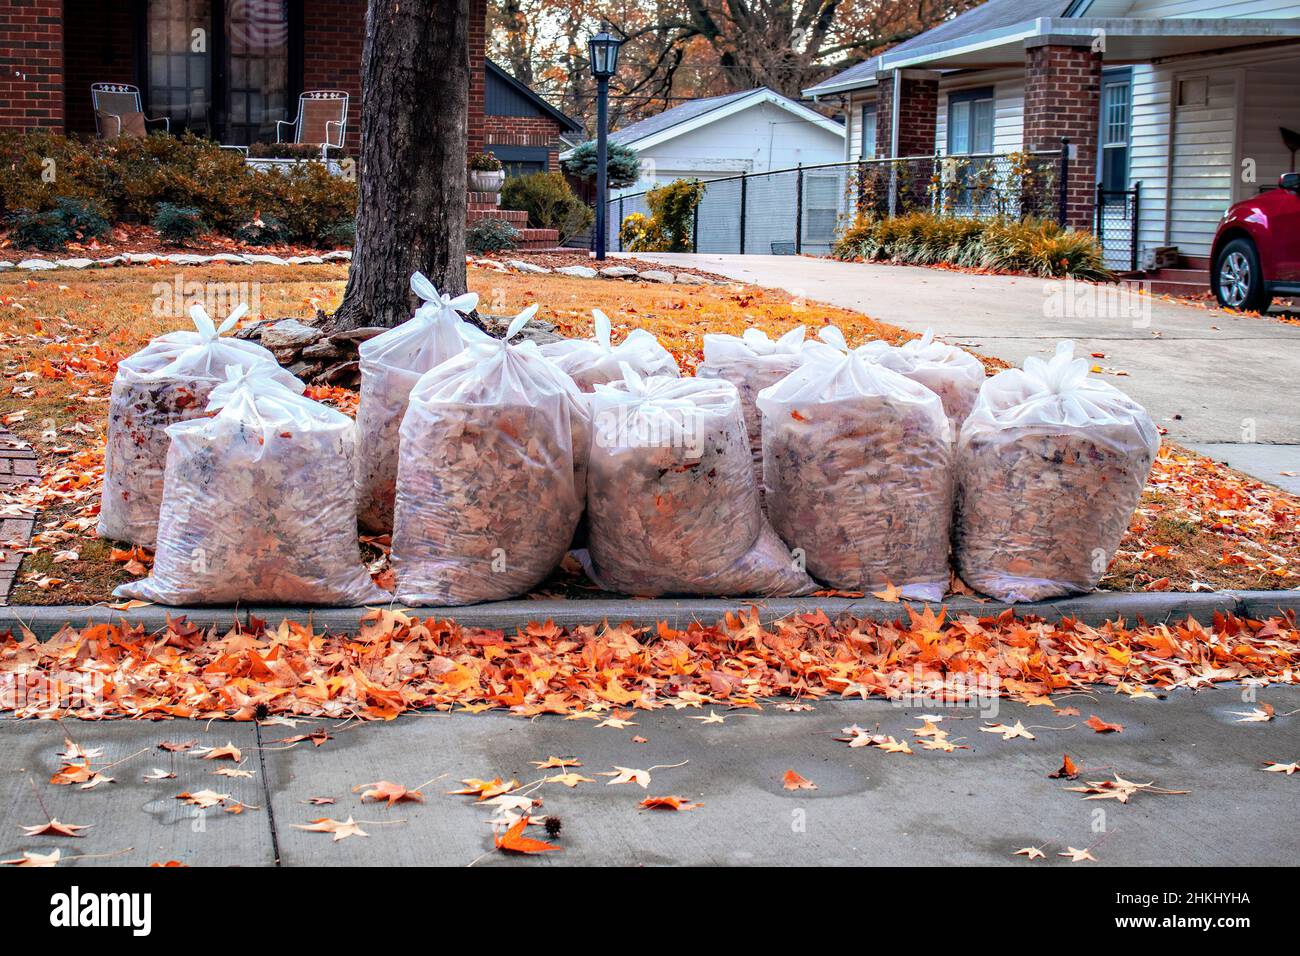 https://c8.alamy.com/comp/2HKHYHA/rows-of-clear-bags-of-autumn-leaves-with-more-maple-leaves-scatterd-on-yard-and-in-street-after-a-rain-in-residential-neighborhood-with-car-in-neighbo-2HKHYHA.jpg